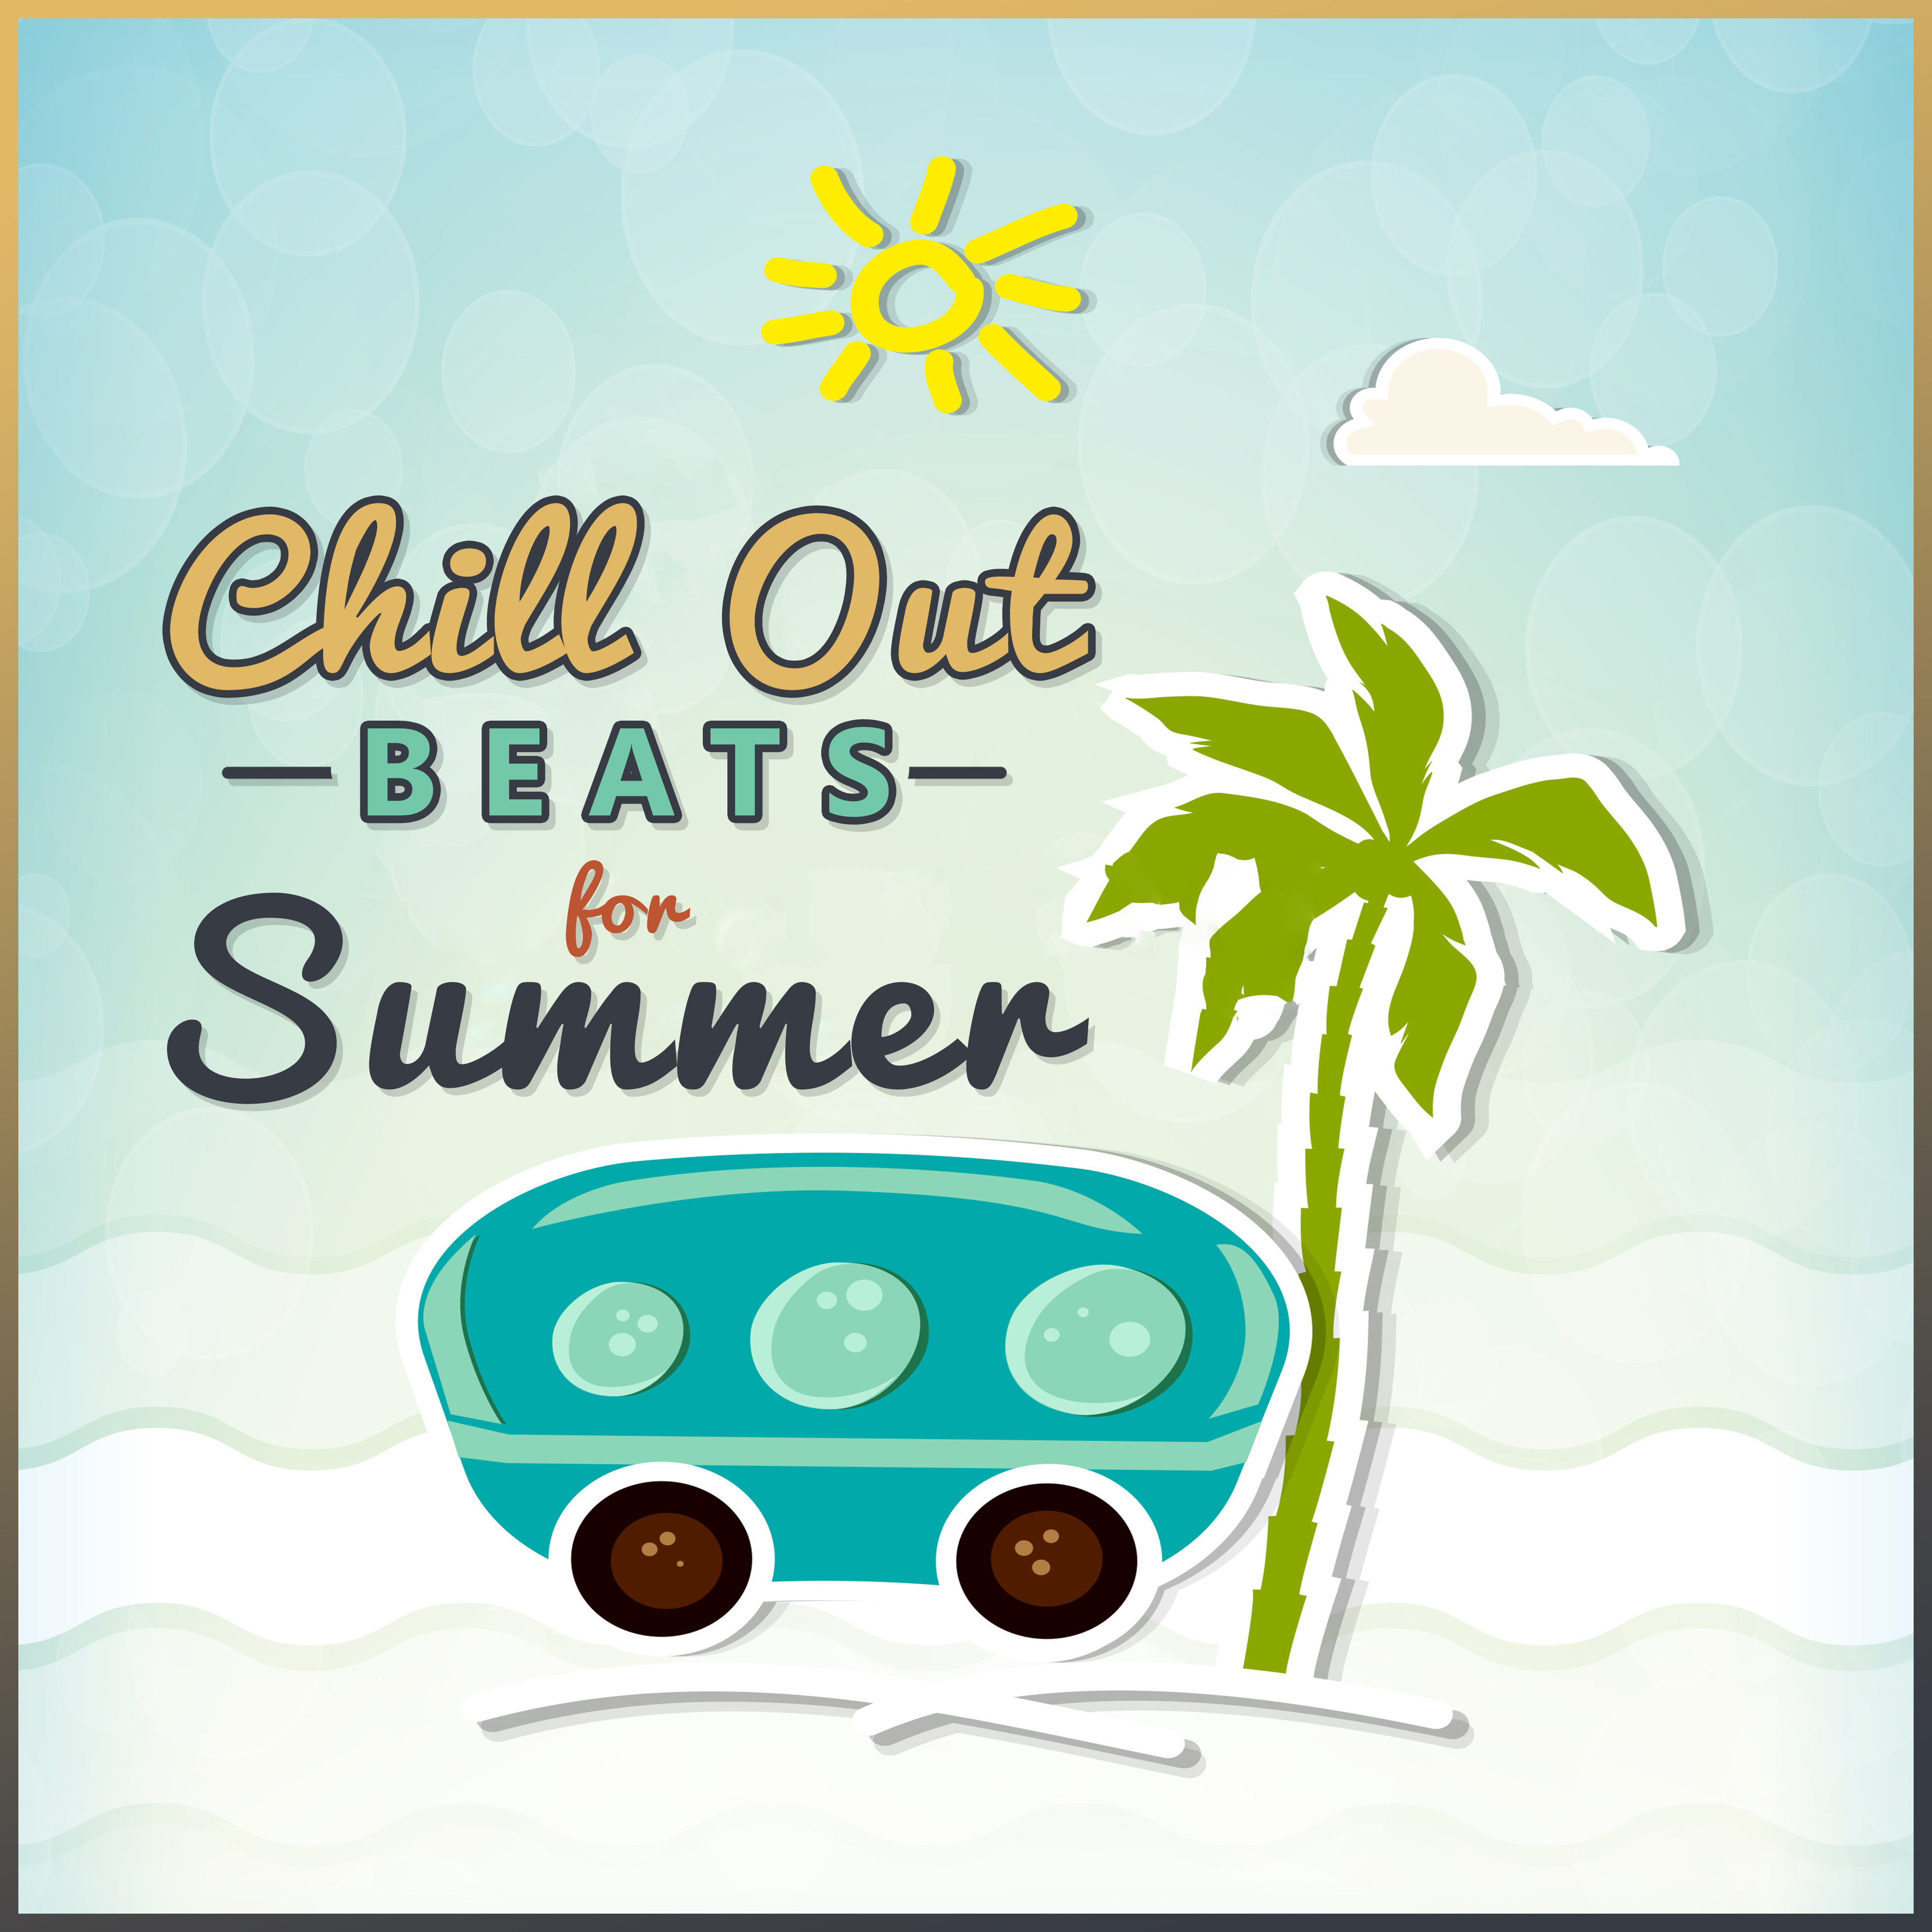 Chill Out Beats for Summer – Peaceful Summer Music, Sounds to Relax, Chill Out Beats, Rest on the Tropical Island